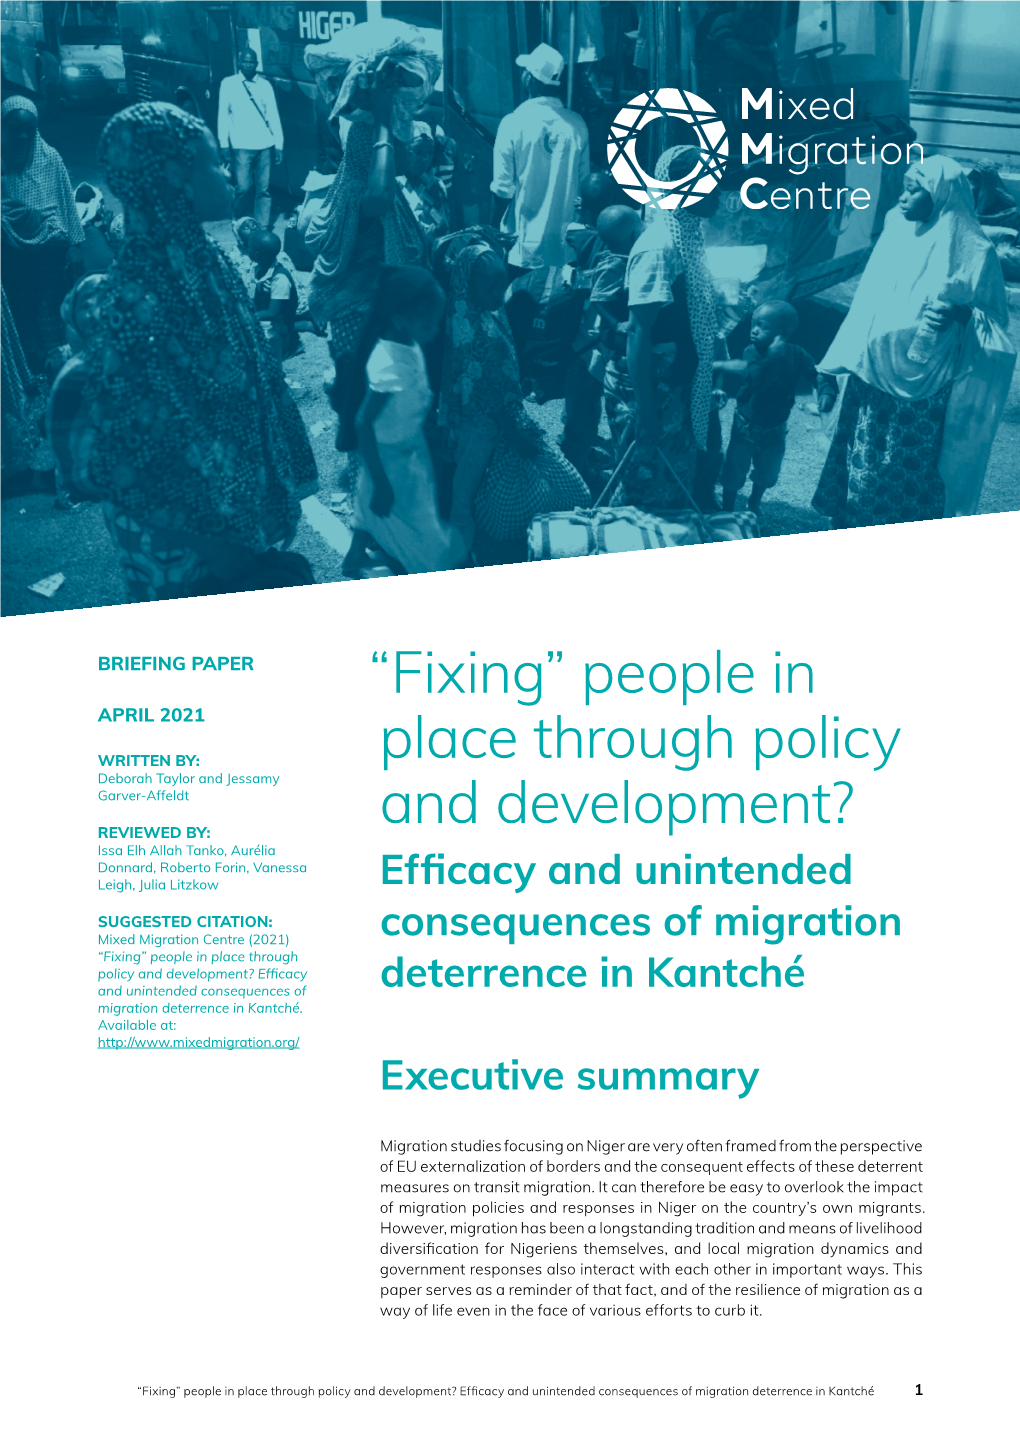 Efficacy and Unintended Consequences of Migration Deterrence in Kantché Executive Summary